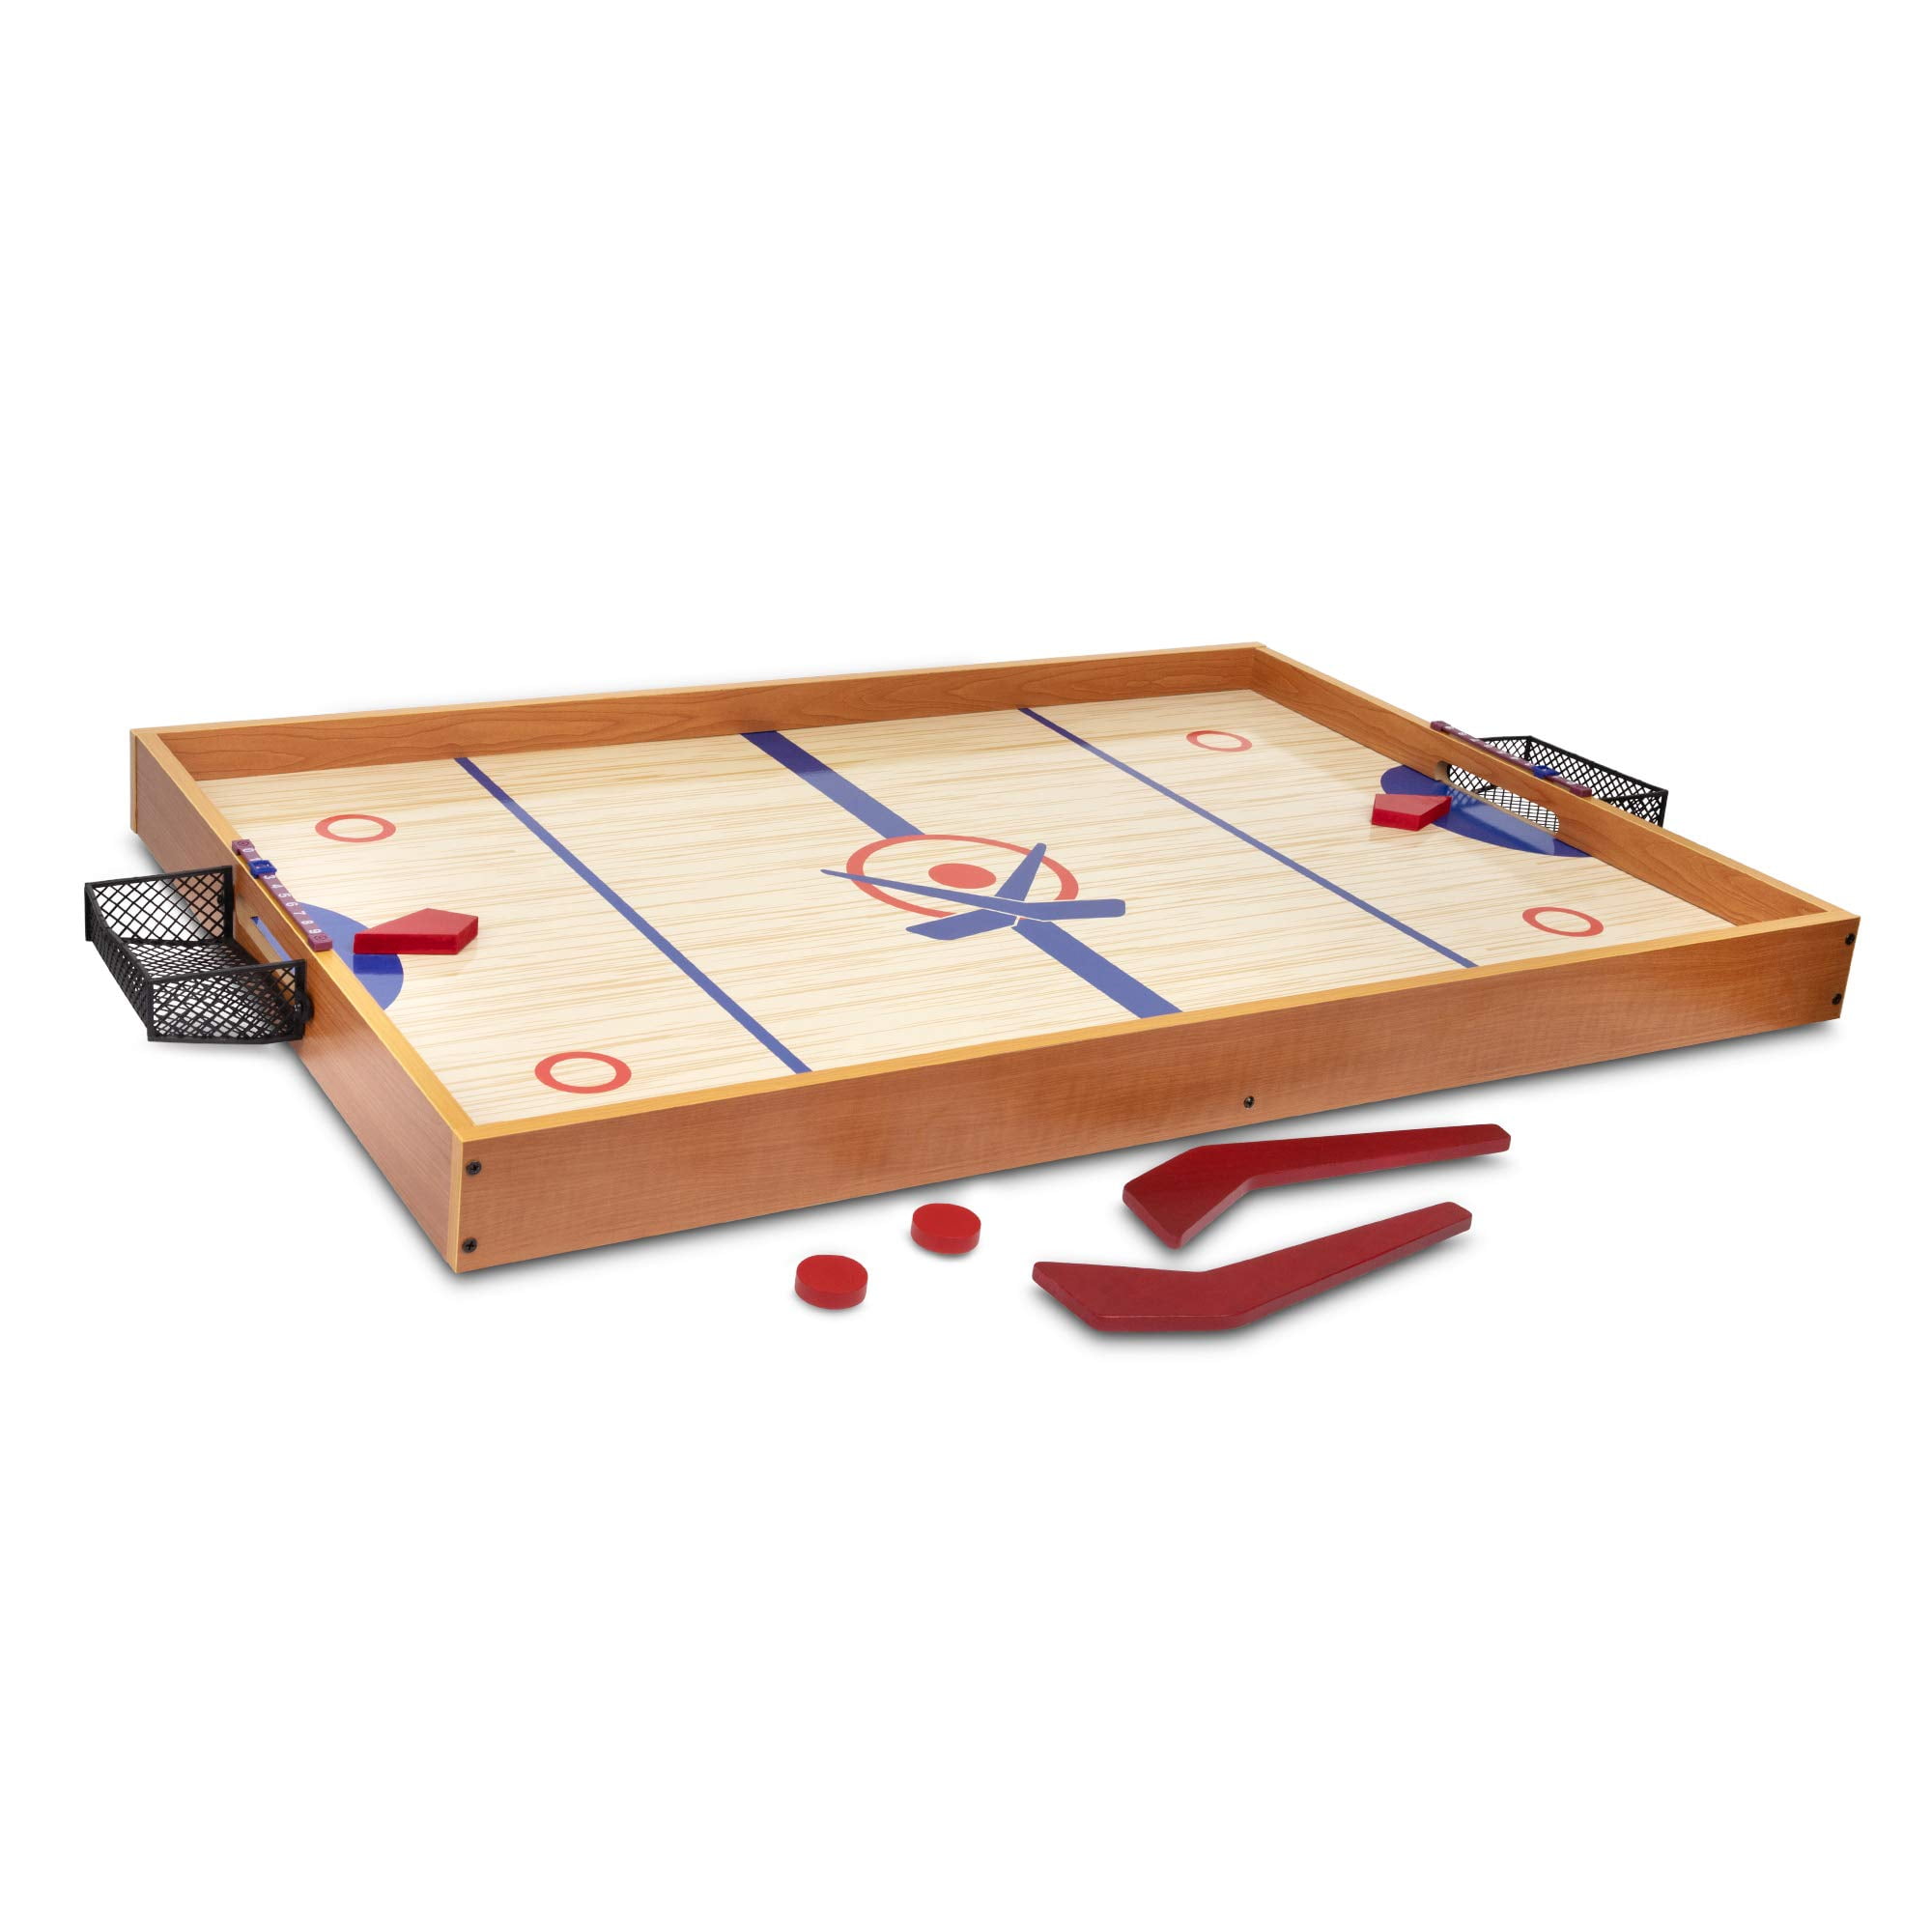 Point Games Tabletop Slap Shot Hockey Game, Super Durable Large Wooden Hockey Board with 2 Hockey Sticks and Pucks, Great Family Game for Ages 4+ 